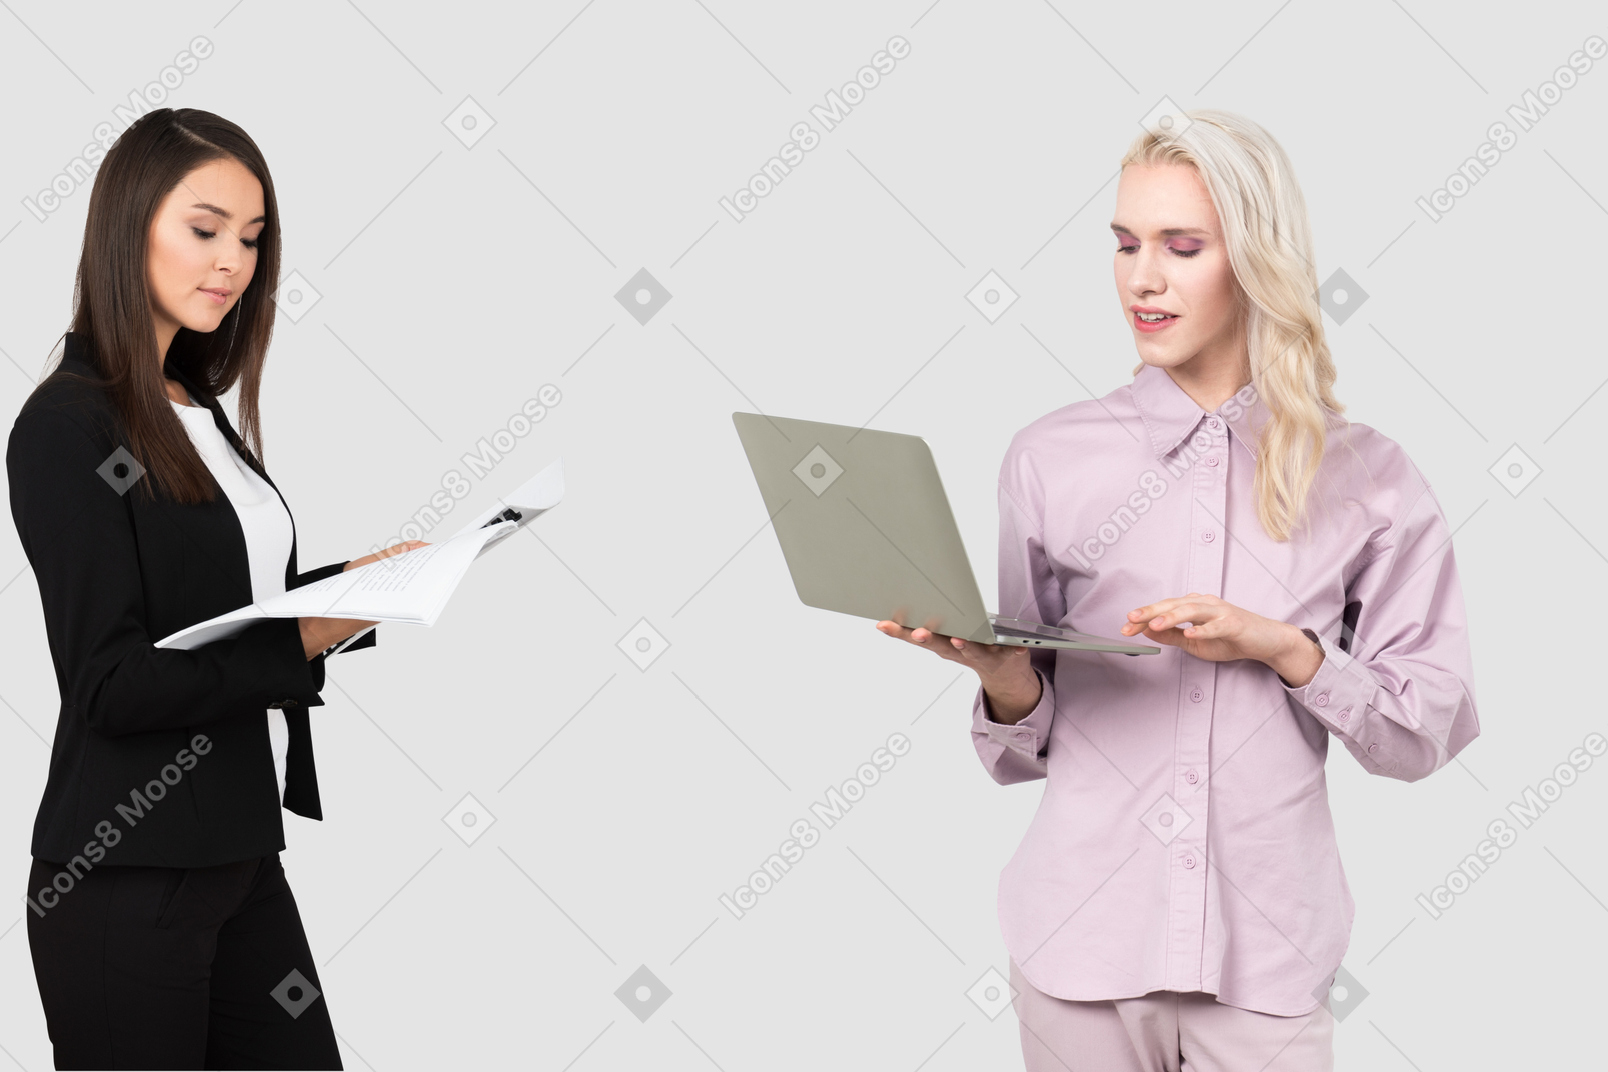 Woman and person standing next to each other with laptops